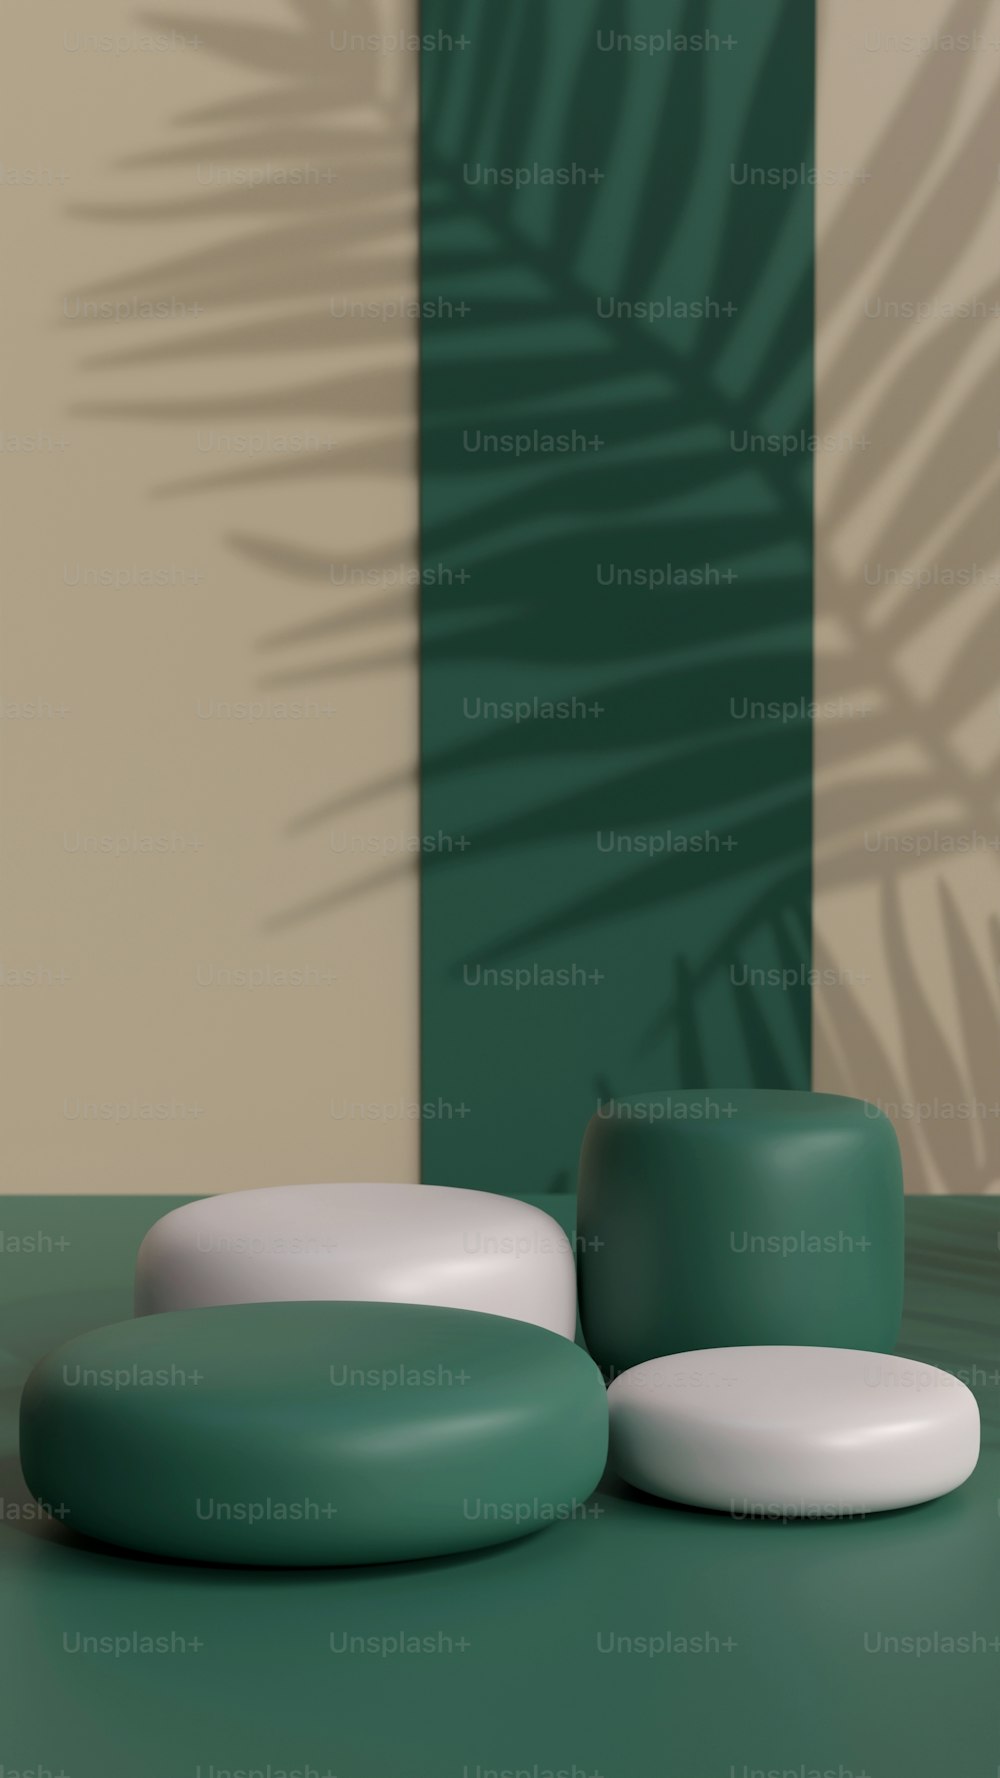 a green and white object sitting on top of a table